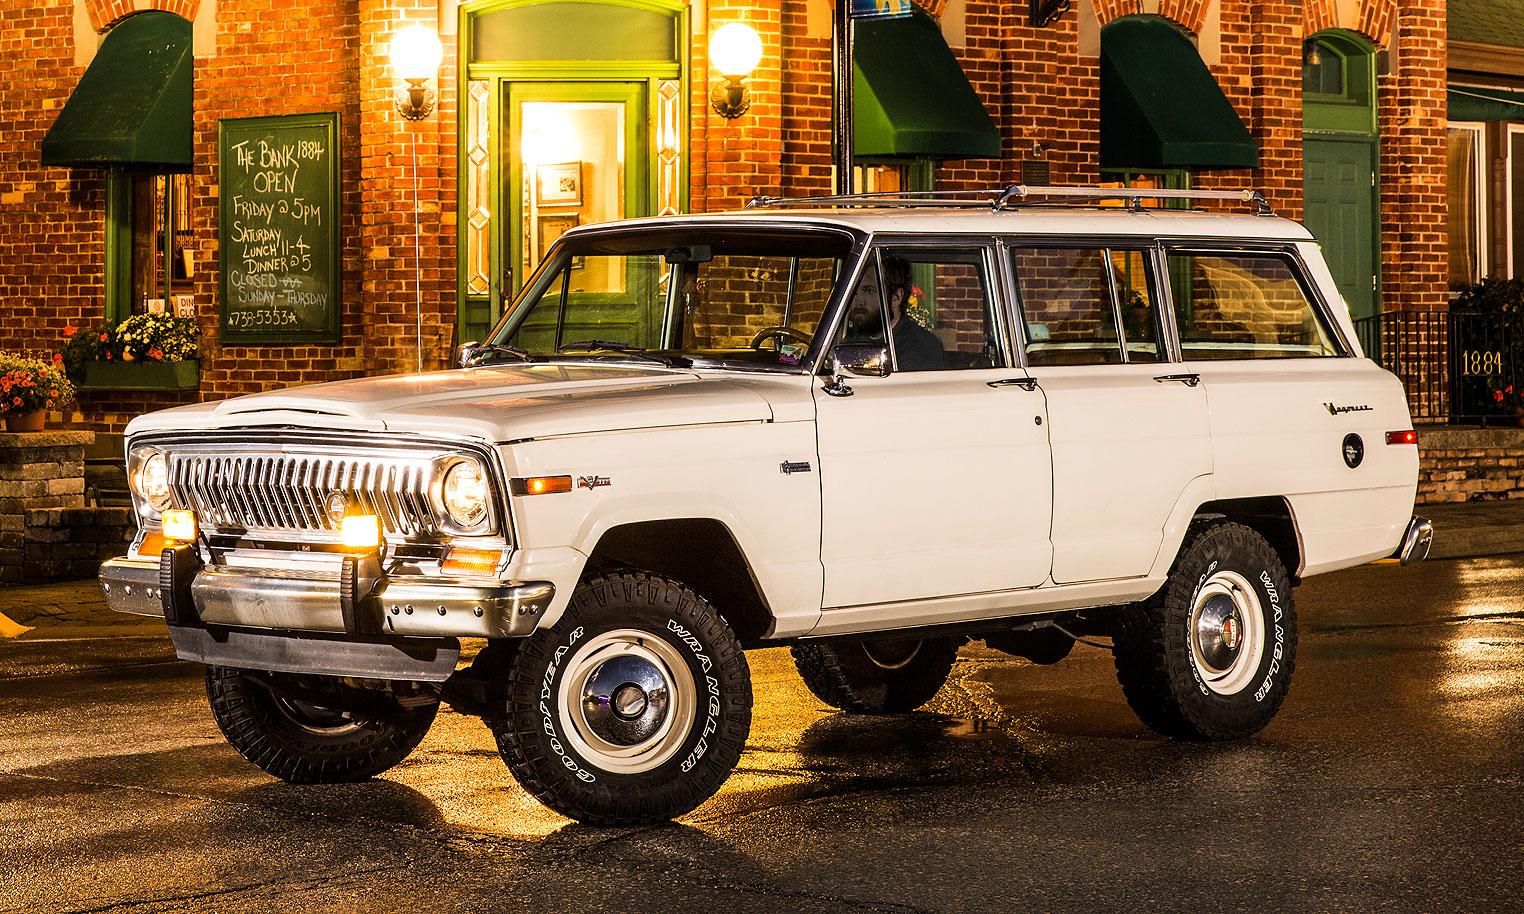 Jeep Wagoneer Wallpapers Vehicles Hq Jeep Wagoneer Pictures 4k Wallpapers 2019